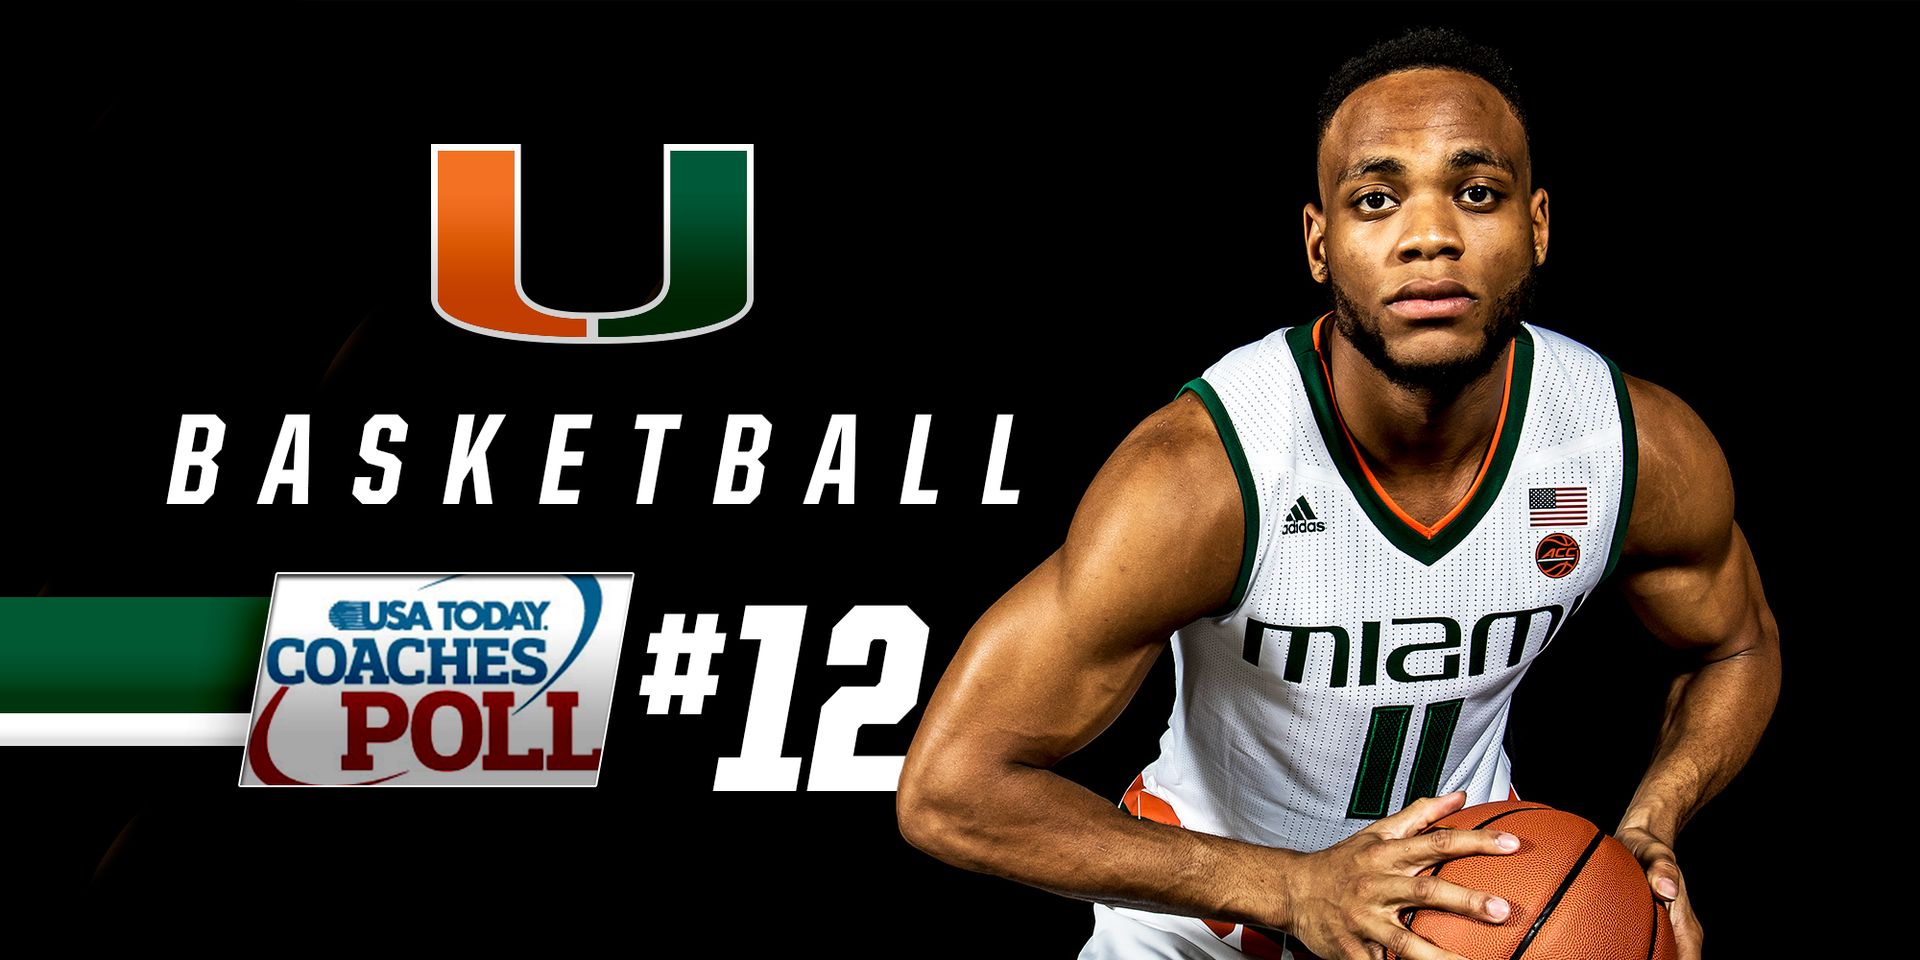 Canes Debut at No. 12 in USA TODAY Coaches Poll